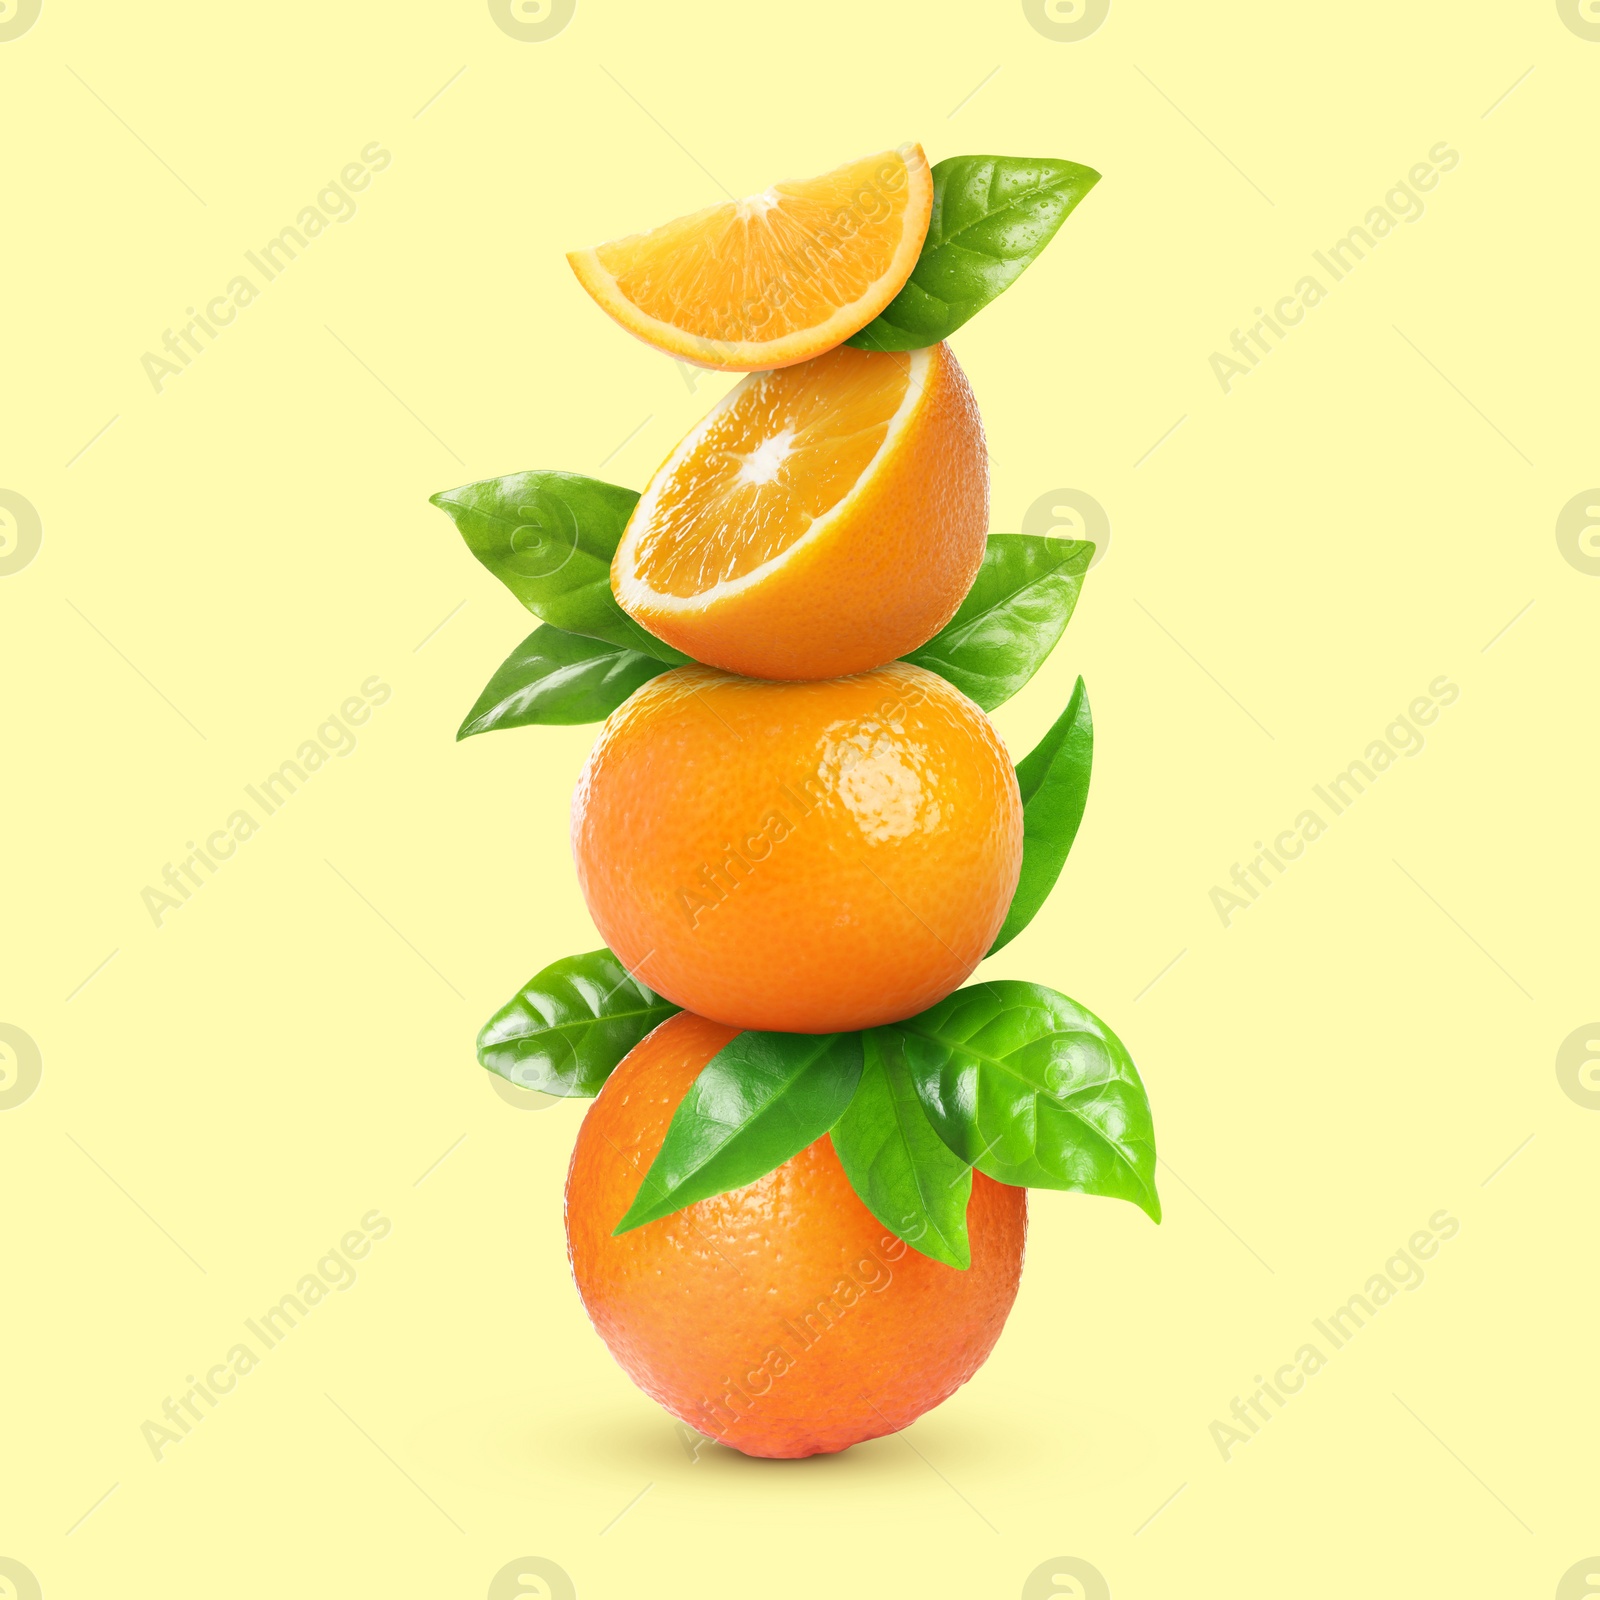 Image of Stacked cut and whole oranges with green leaves on pale light yellow background